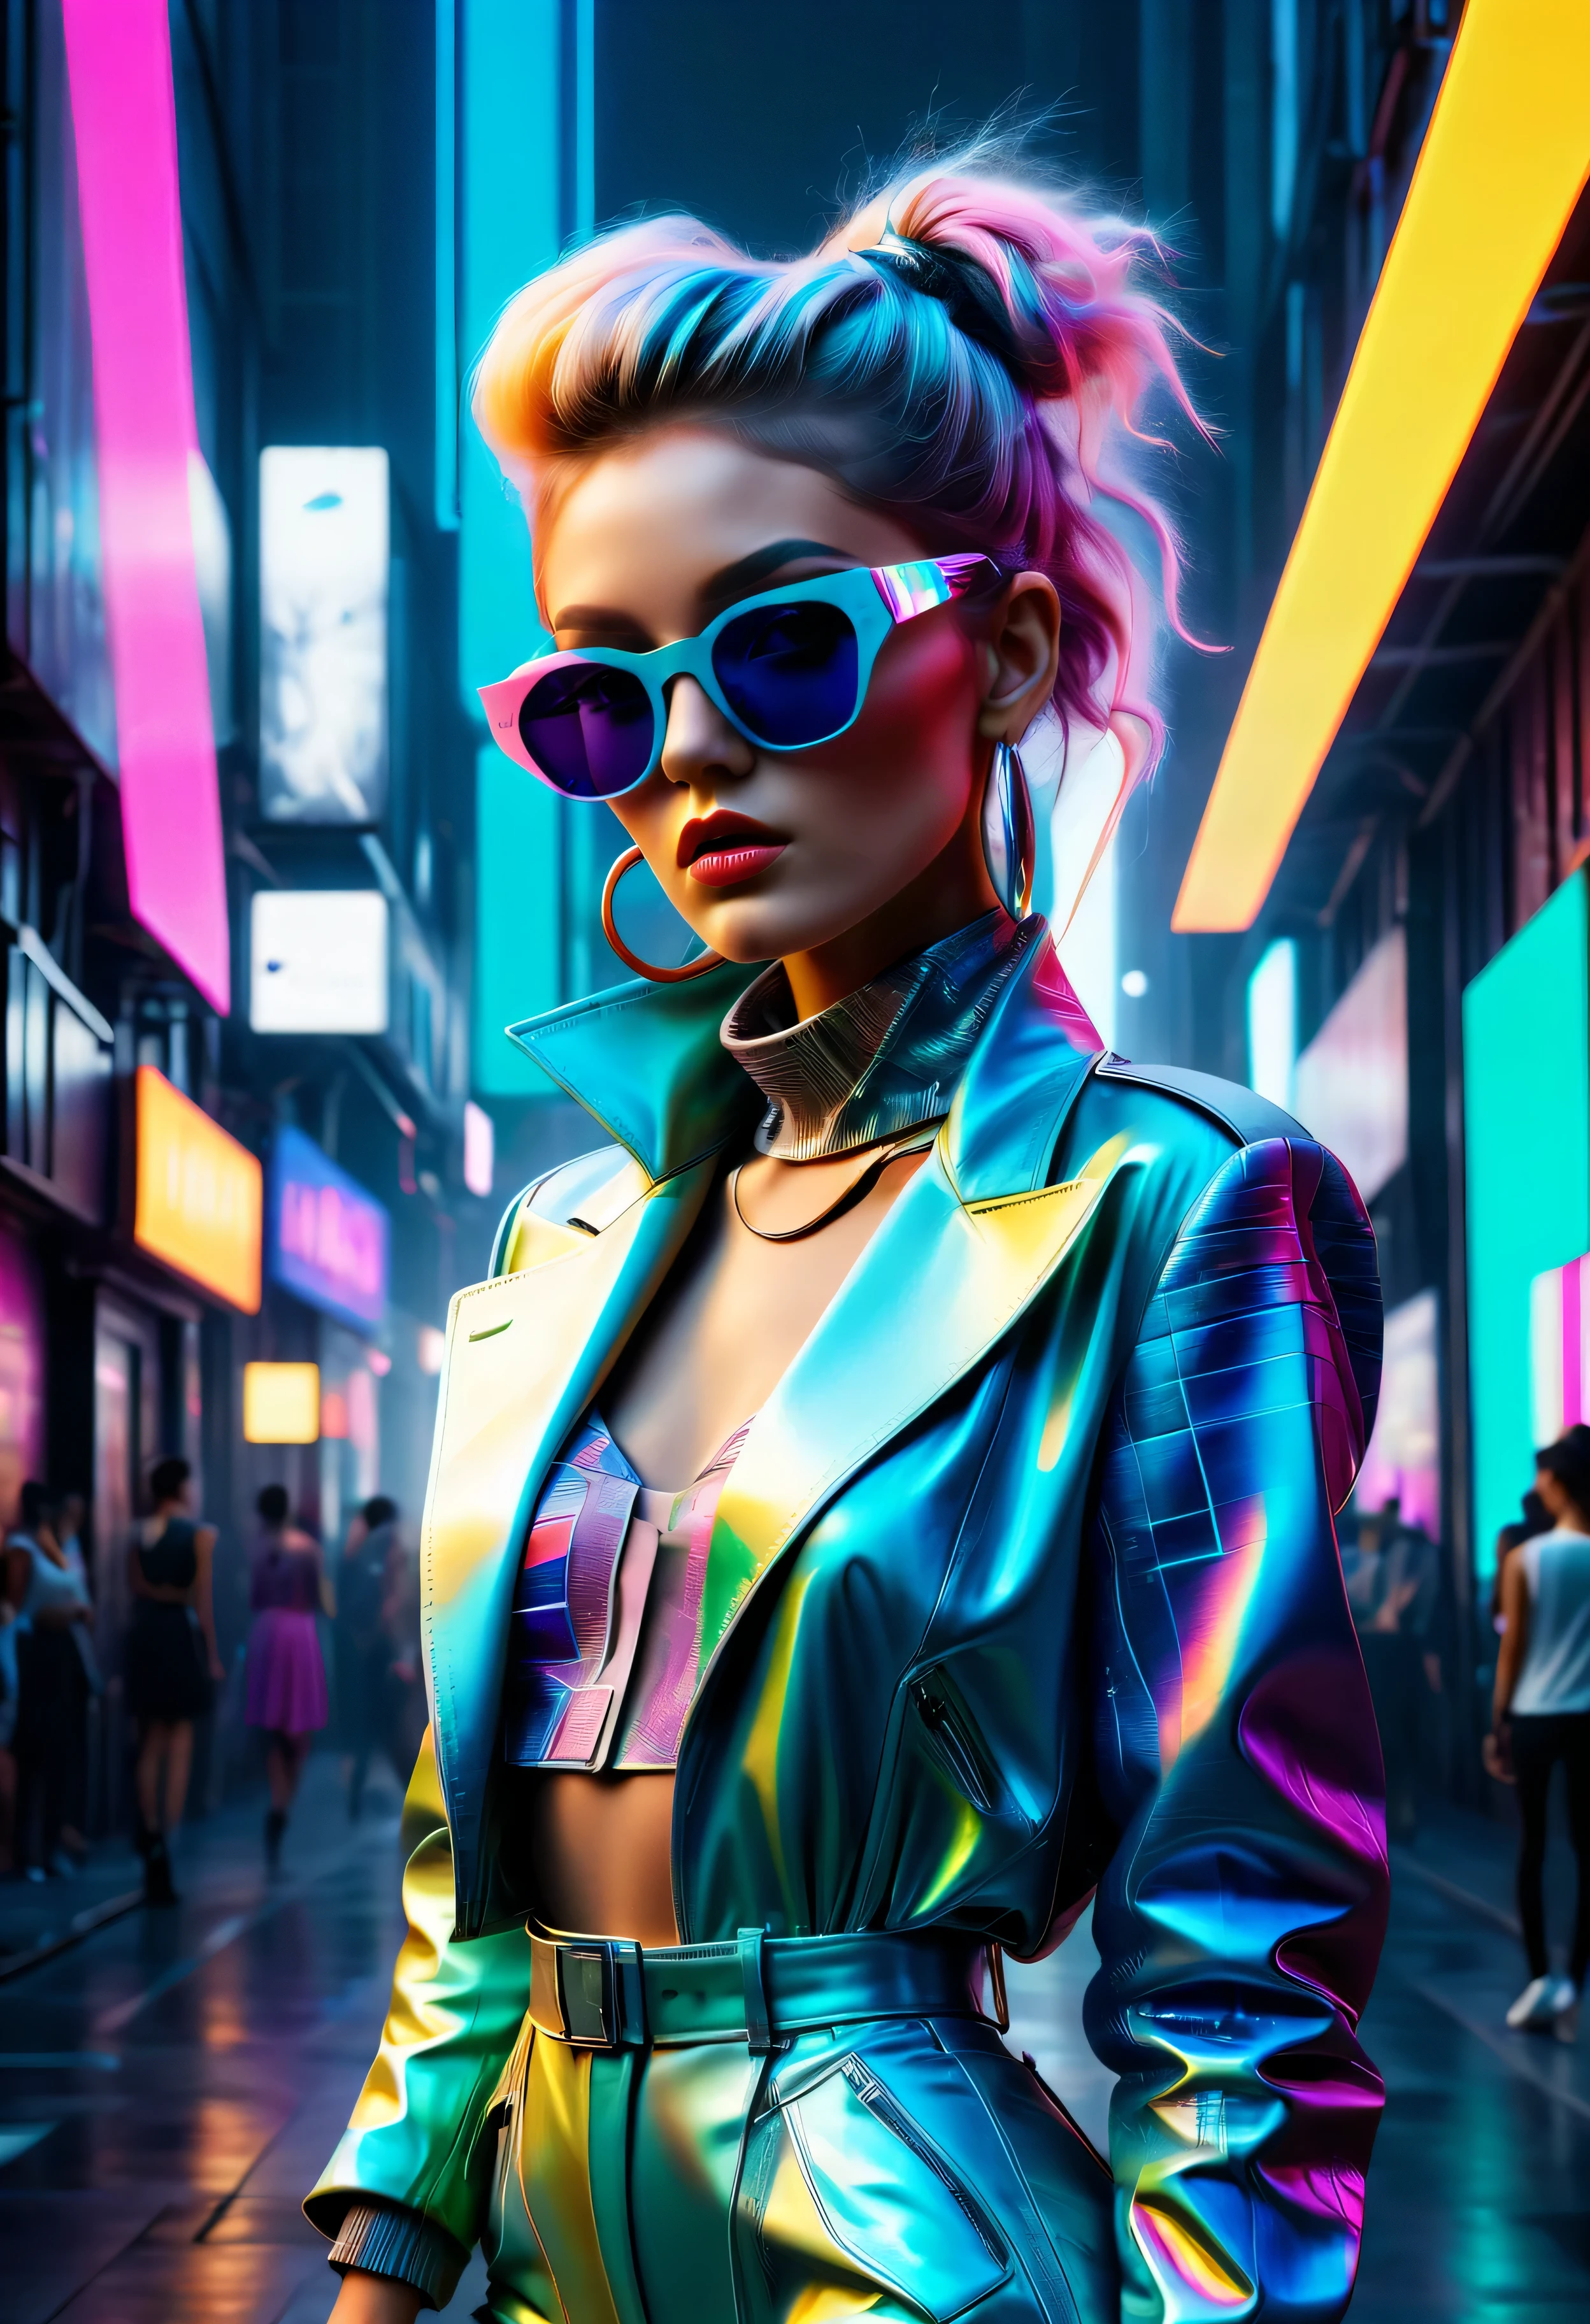 (best quality,4k,8k,highres,masterpiece:1.2),ultra-detailed,(realistic,photorealistic,photo-realistic:1.37),avant-garde,vaporwave aesthetic,unique fashion concept,creative and futuristic designs,extravagant wardrobe,vibrant and neon color palette,experimental materials and textures,digital glitch effect,surreal backdrop of a retro-futuristic cityscape,models portraying confidence and attitude,hairstyles with bold colors and geometric shapes,
dramatic makeup with metallic accents,high-fashion accessories like oversized sunglasses and statement jewelry,platform shoes with neon lights,confident poses and dynamic movements,interactive holographic projections surrounding the models,artificial intelligence assistants wearing fashion-forward outfits,superimposed data streams and coding symbols,highlighting the fusion of technology and fashion,celebrities and influencers showcasing the avant-garde fashion trend,conceptual and thought-provoking fashion show settings,celebrating individuality and self-expression,combining alternative and vintage styles with modern fashion,immersive visual experience for the viewers,cinematic lighting design to enhance the futuristic atmosphere.